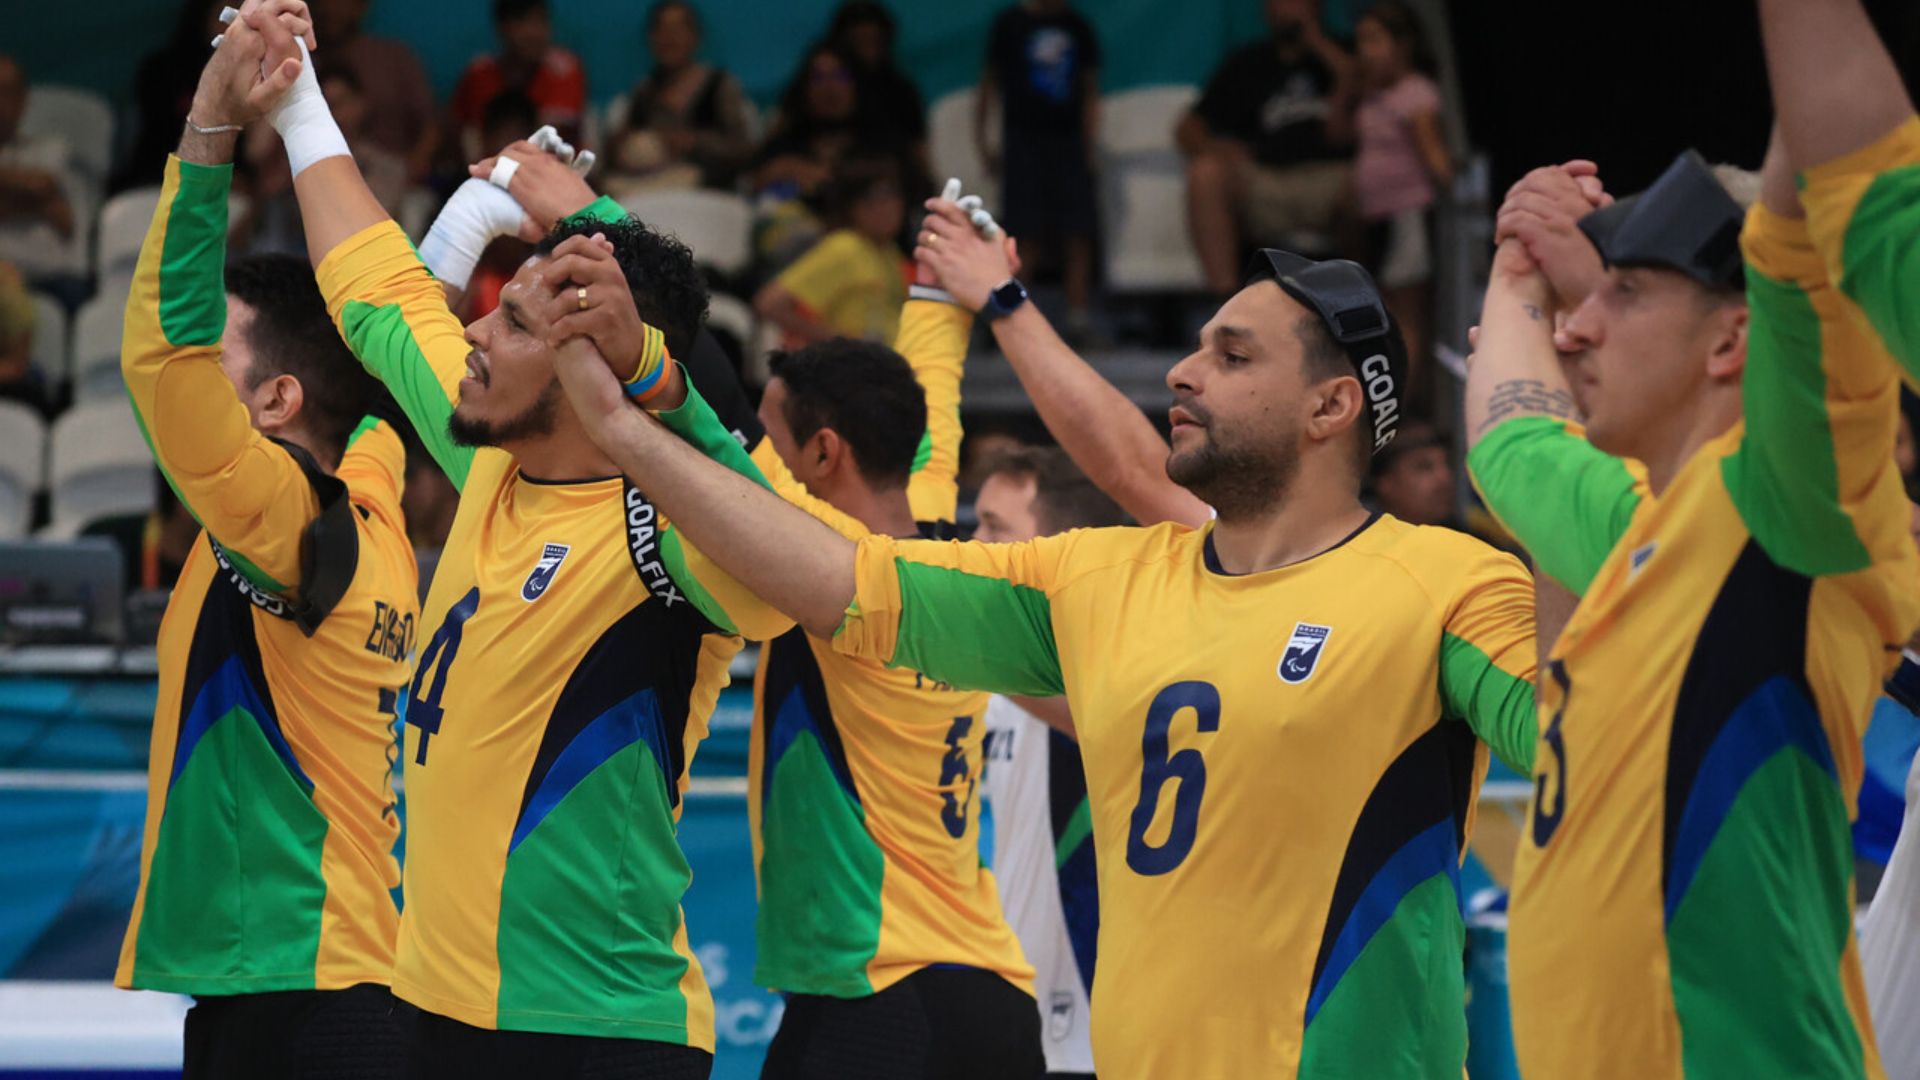 Brazil Is Now four-time Champion in Male's Goalball